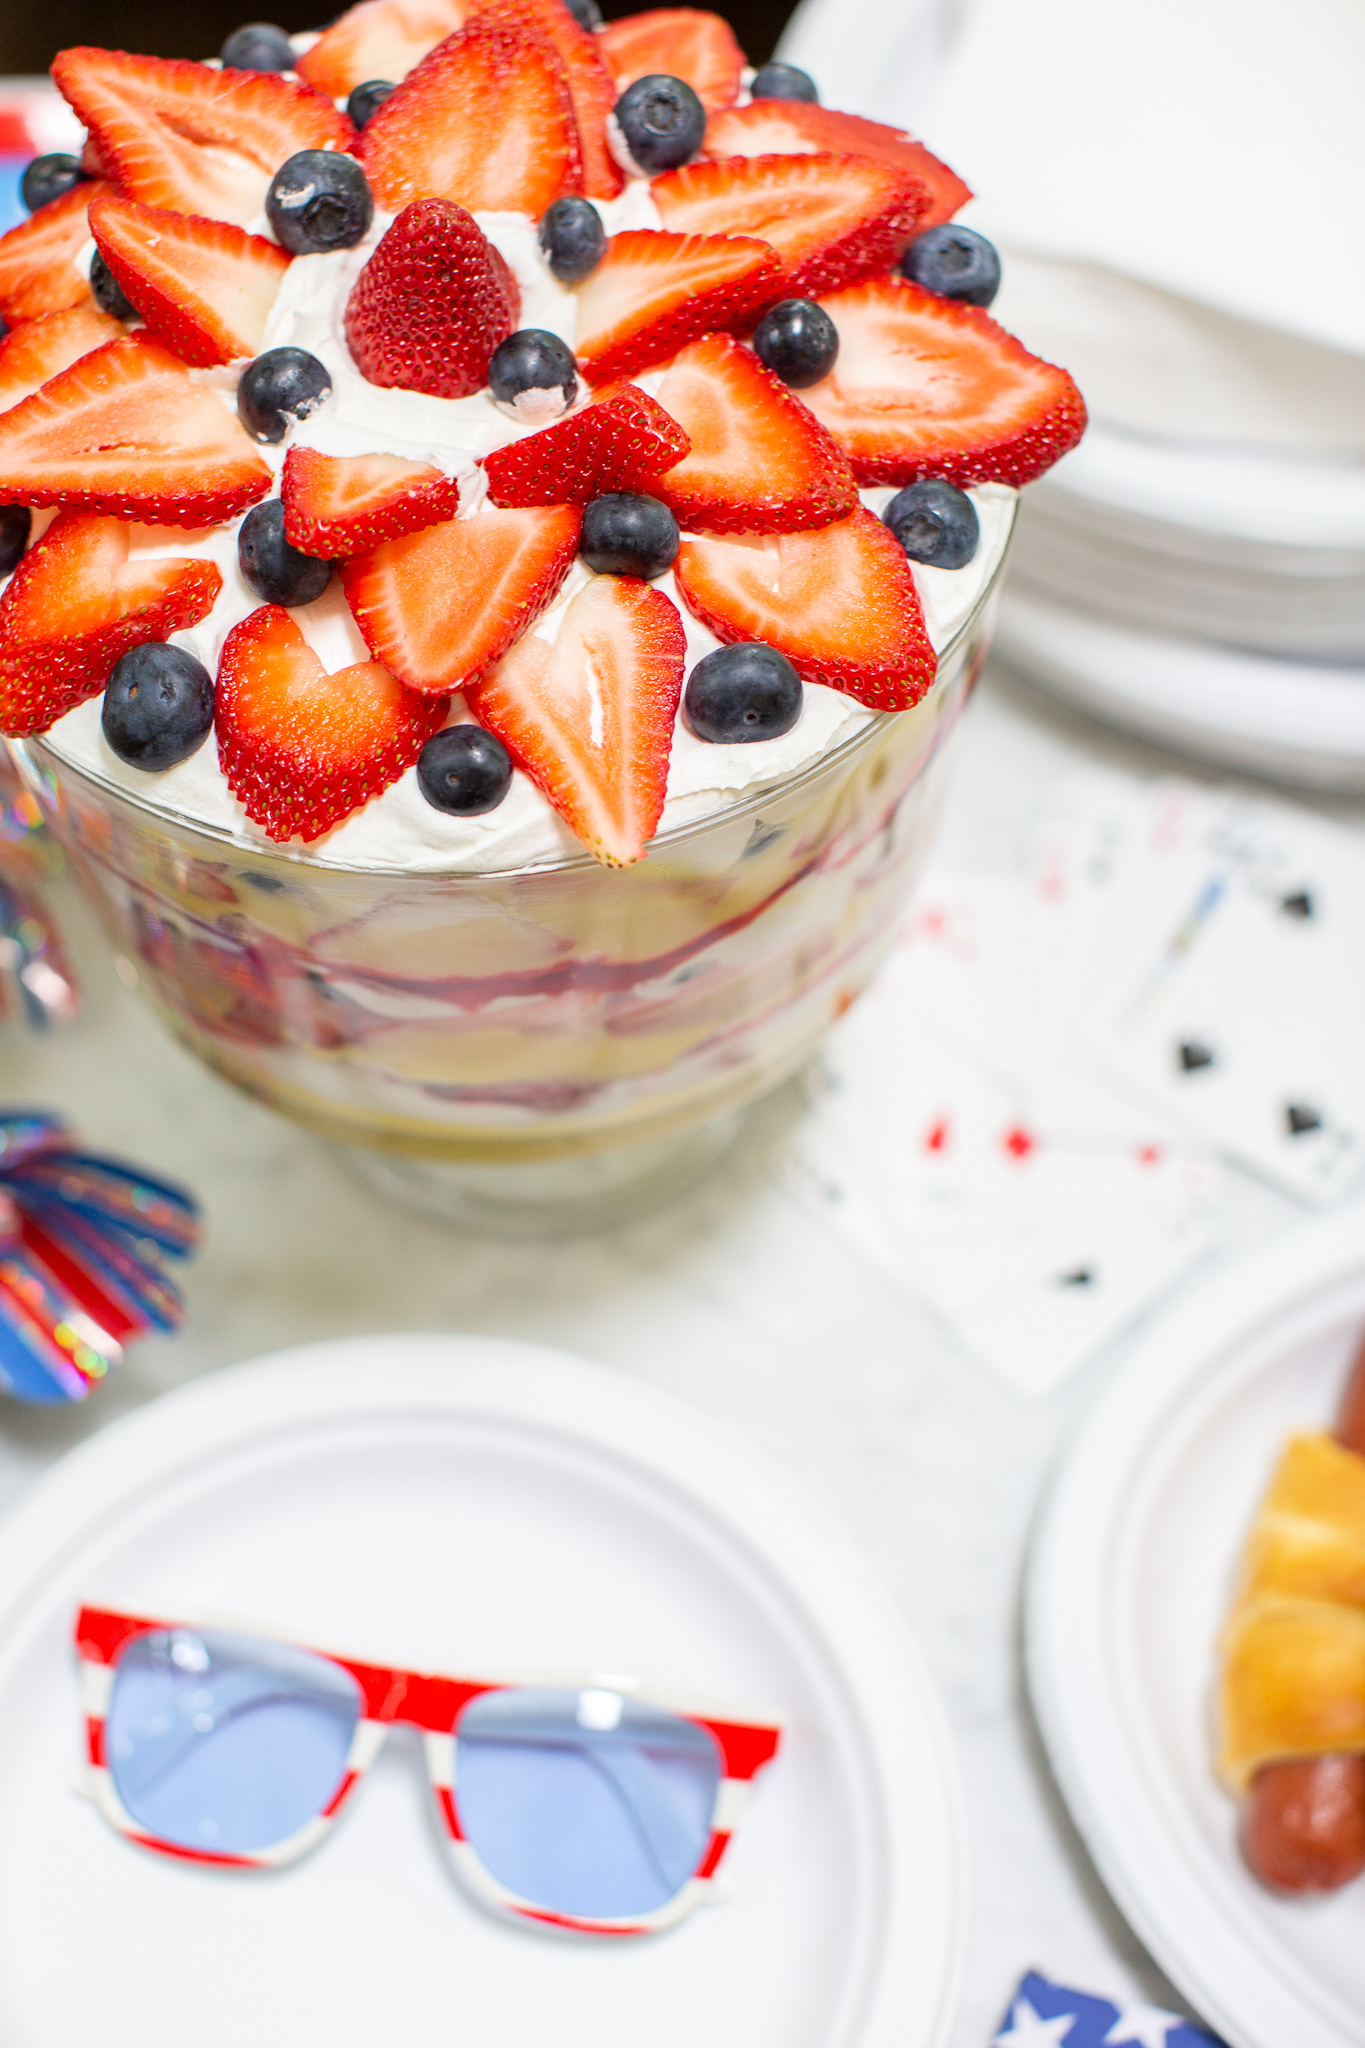 How to Throw the Ultimate (and Easy) 4th of July Party by popular North Carolina blog, Coffee Beans and Bobby Pins: image of chinet white paper plates, chinet white napkins, berry trifle, 4th of July sunglasses, face cards, and hot dogs.